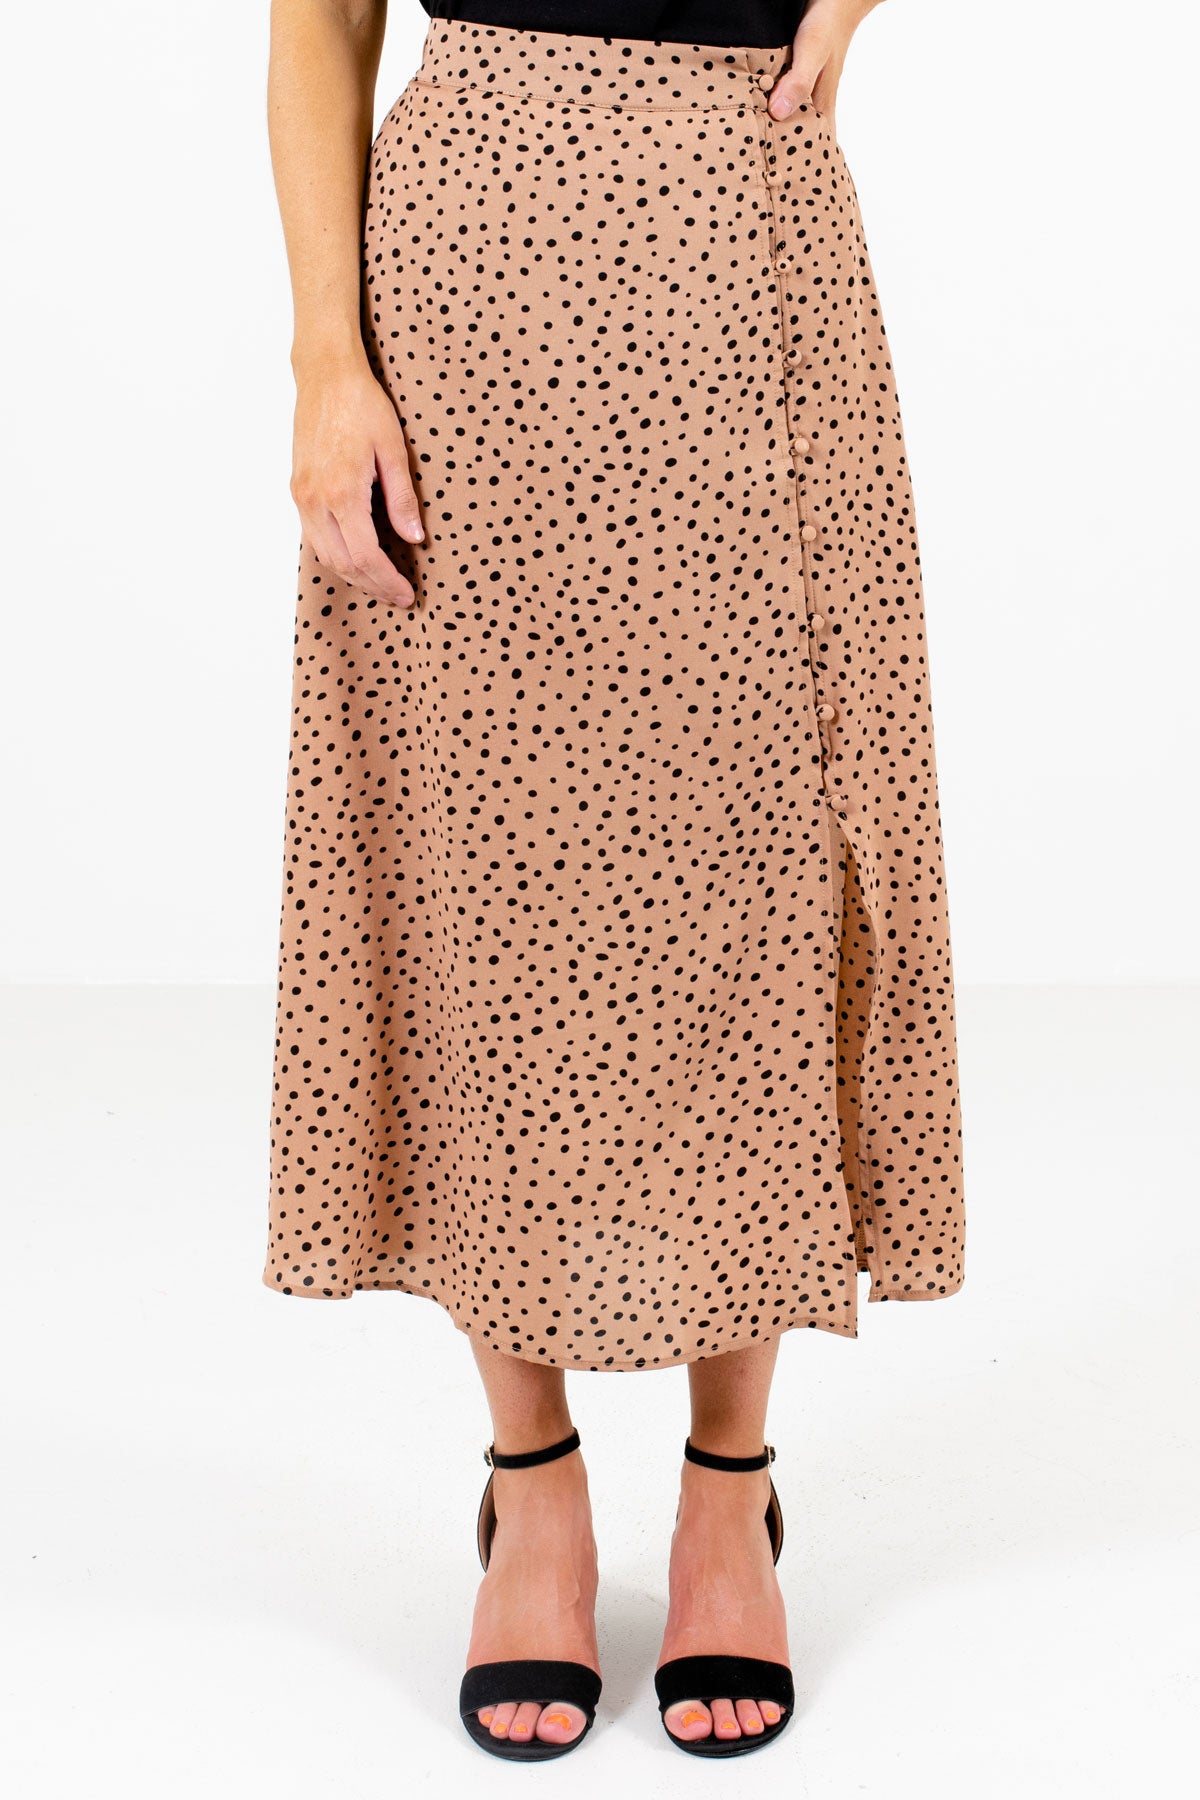 Tan Brown and Black Polka Dot Patterned Boutique Midi Skirts for Women